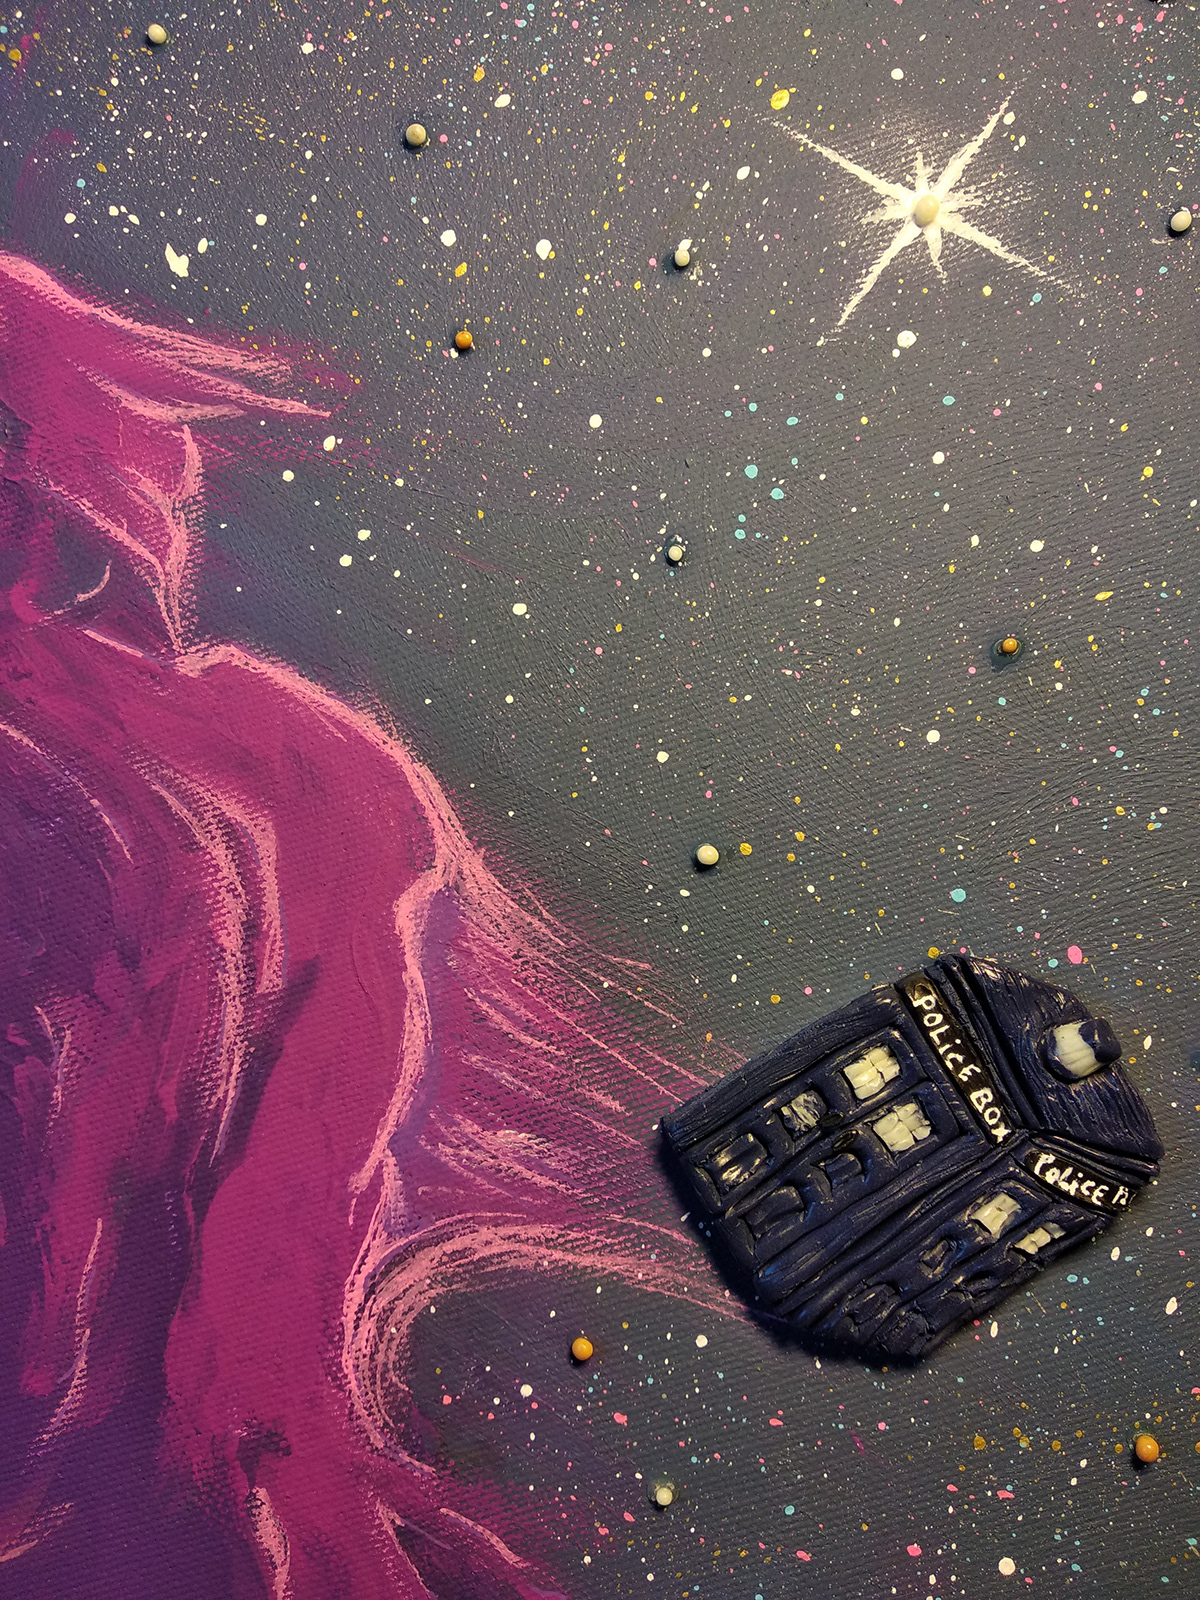 tardis Doctor Who Space  stars Plasticine fimo Fan Art acrylic painting canvas polymer clay